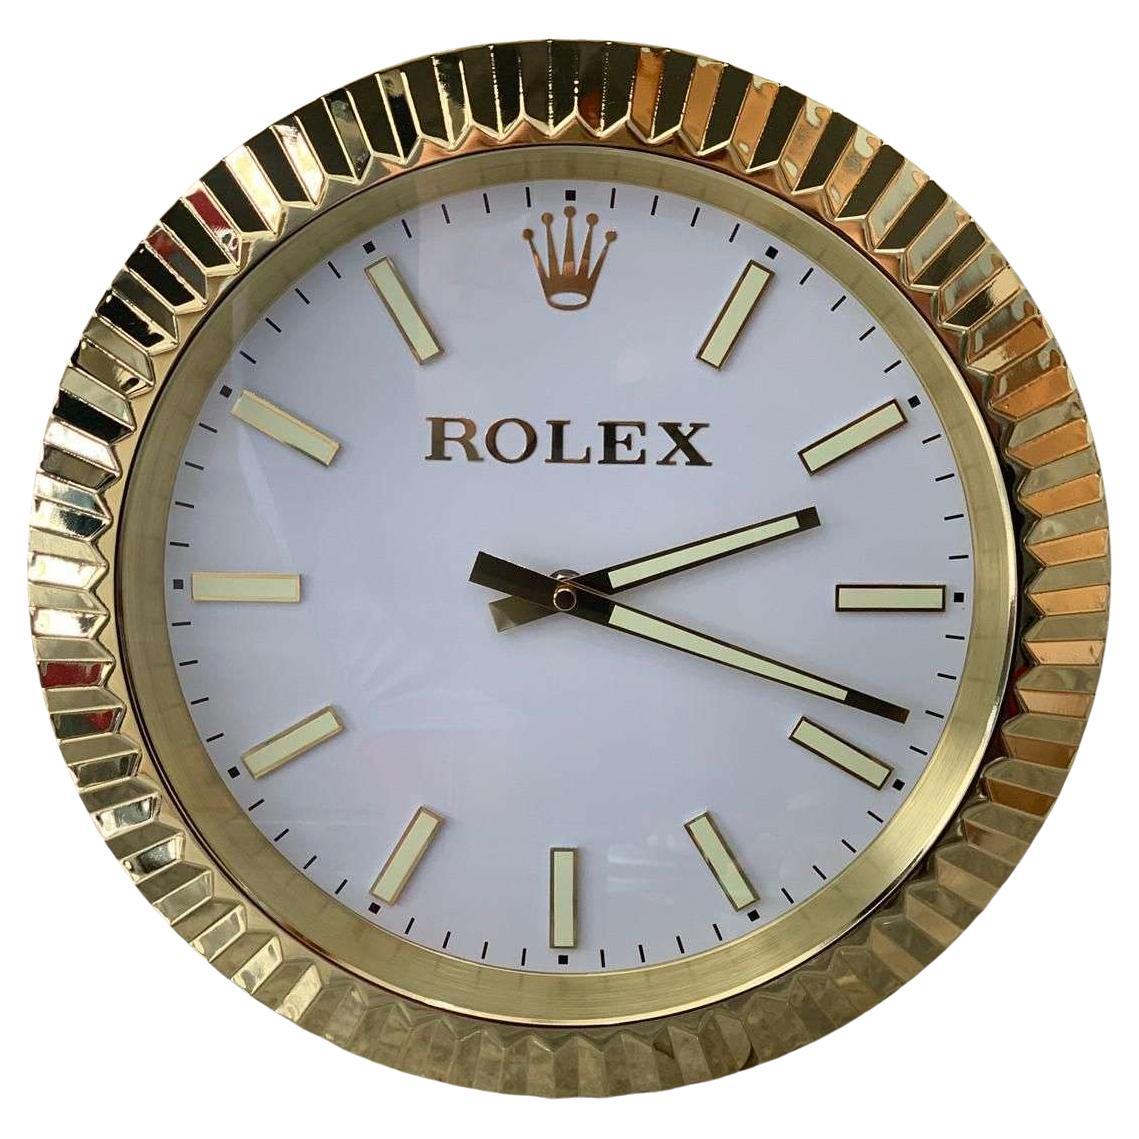 ROLEX Officially Certified Datejust Gold Wall Clock 